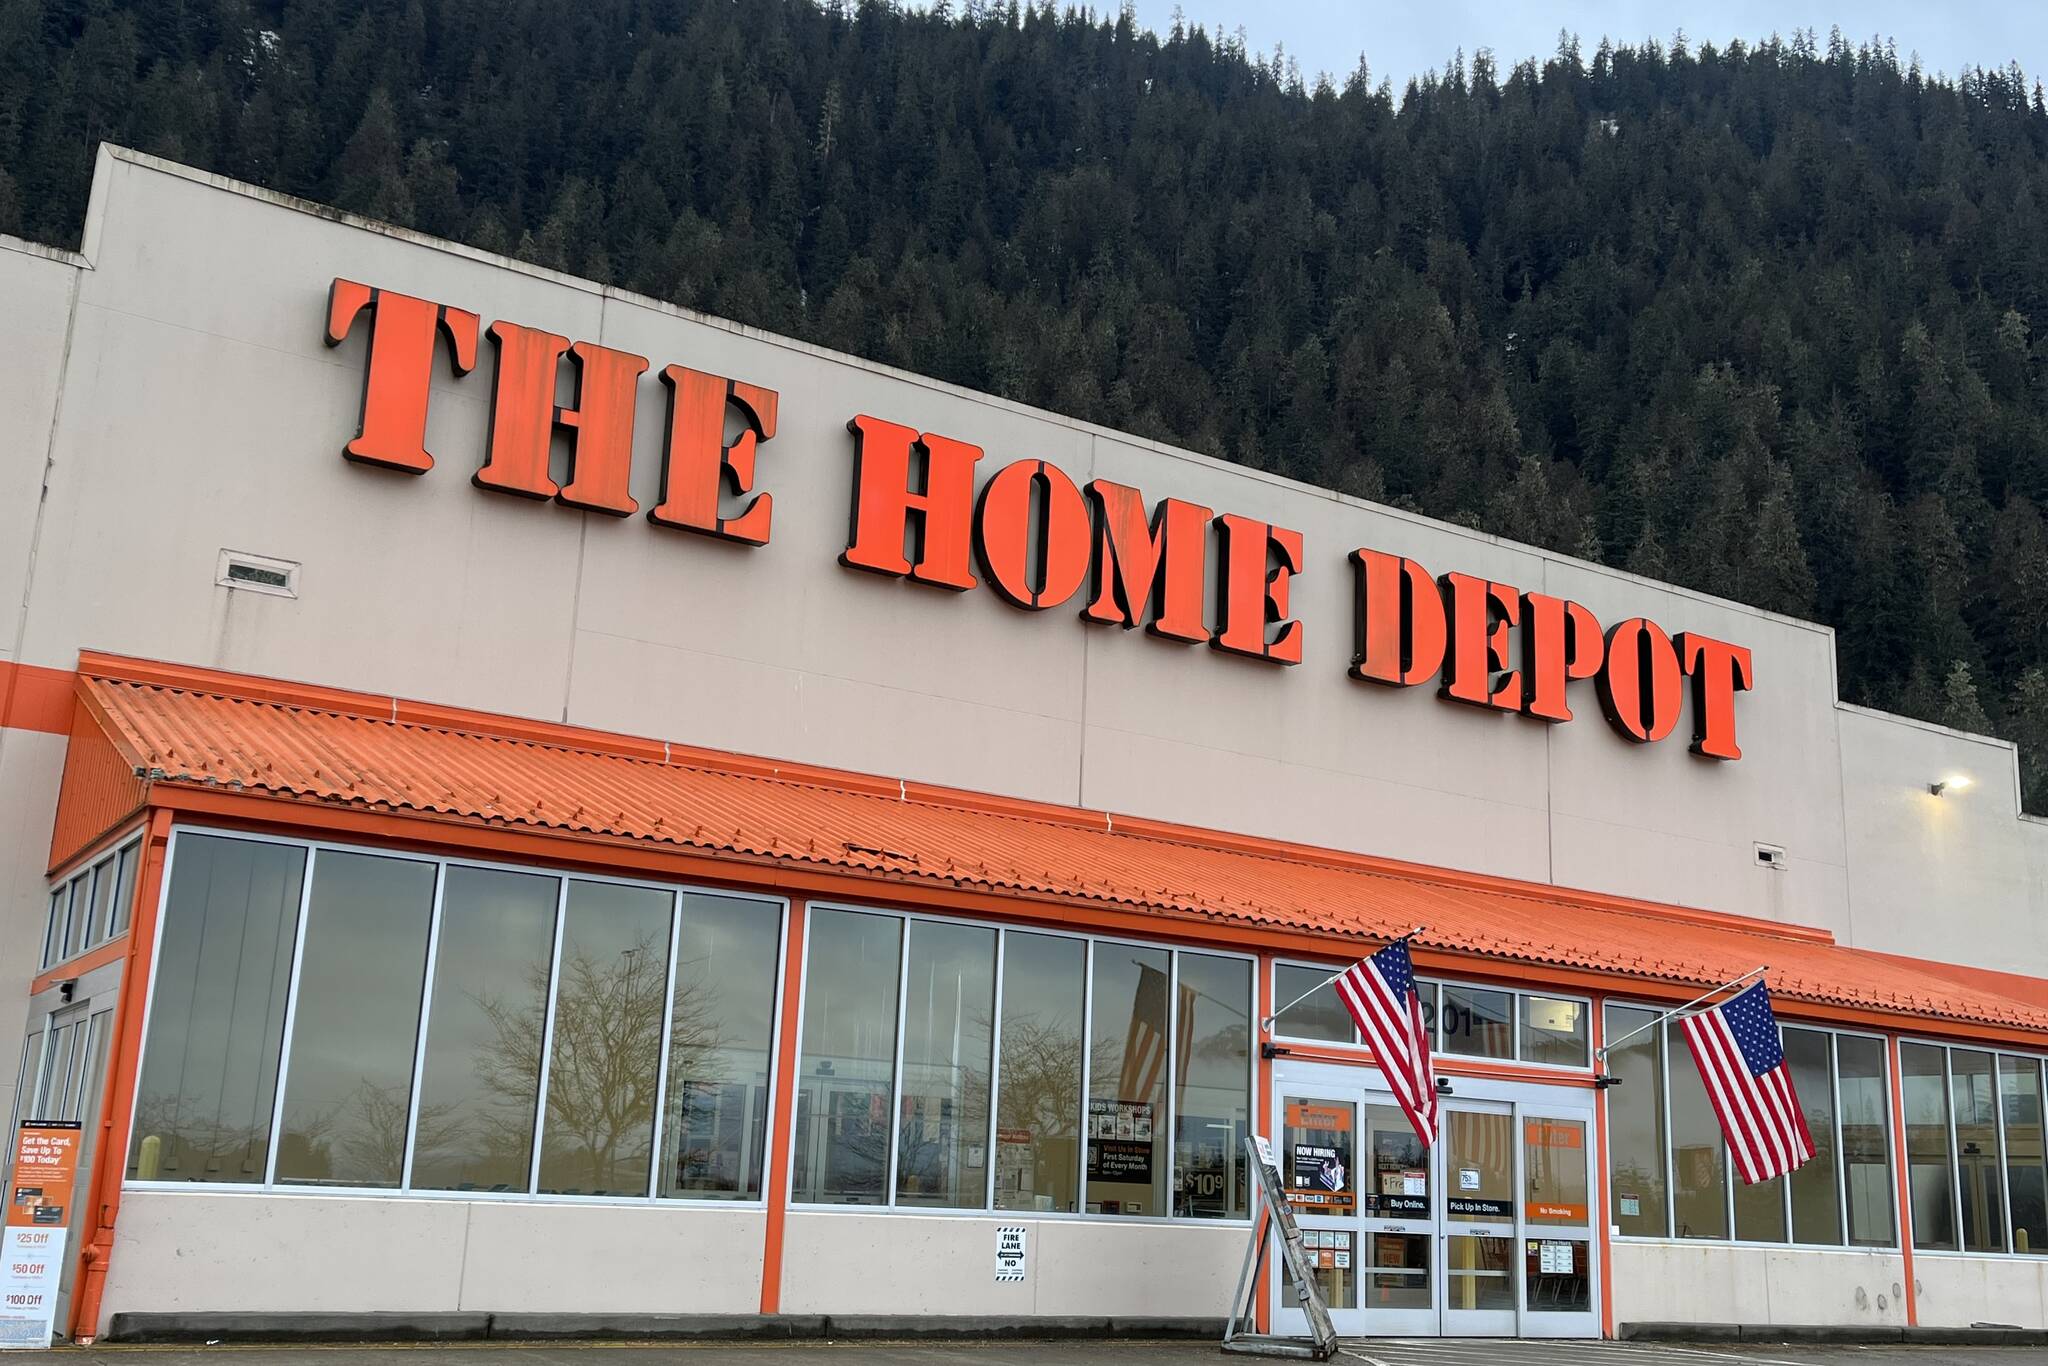 Home Depot in Juneau is where 60-year-old Anthony C. Perry was arrested Monday by JPD on an outstanding felony warrant for two counts of second-degree burglary. Perry was additionally charged with violating condition of release, resisting arrest and three counts of fourth-degree assault. (Jonson Kuhn / Juneau Empire)